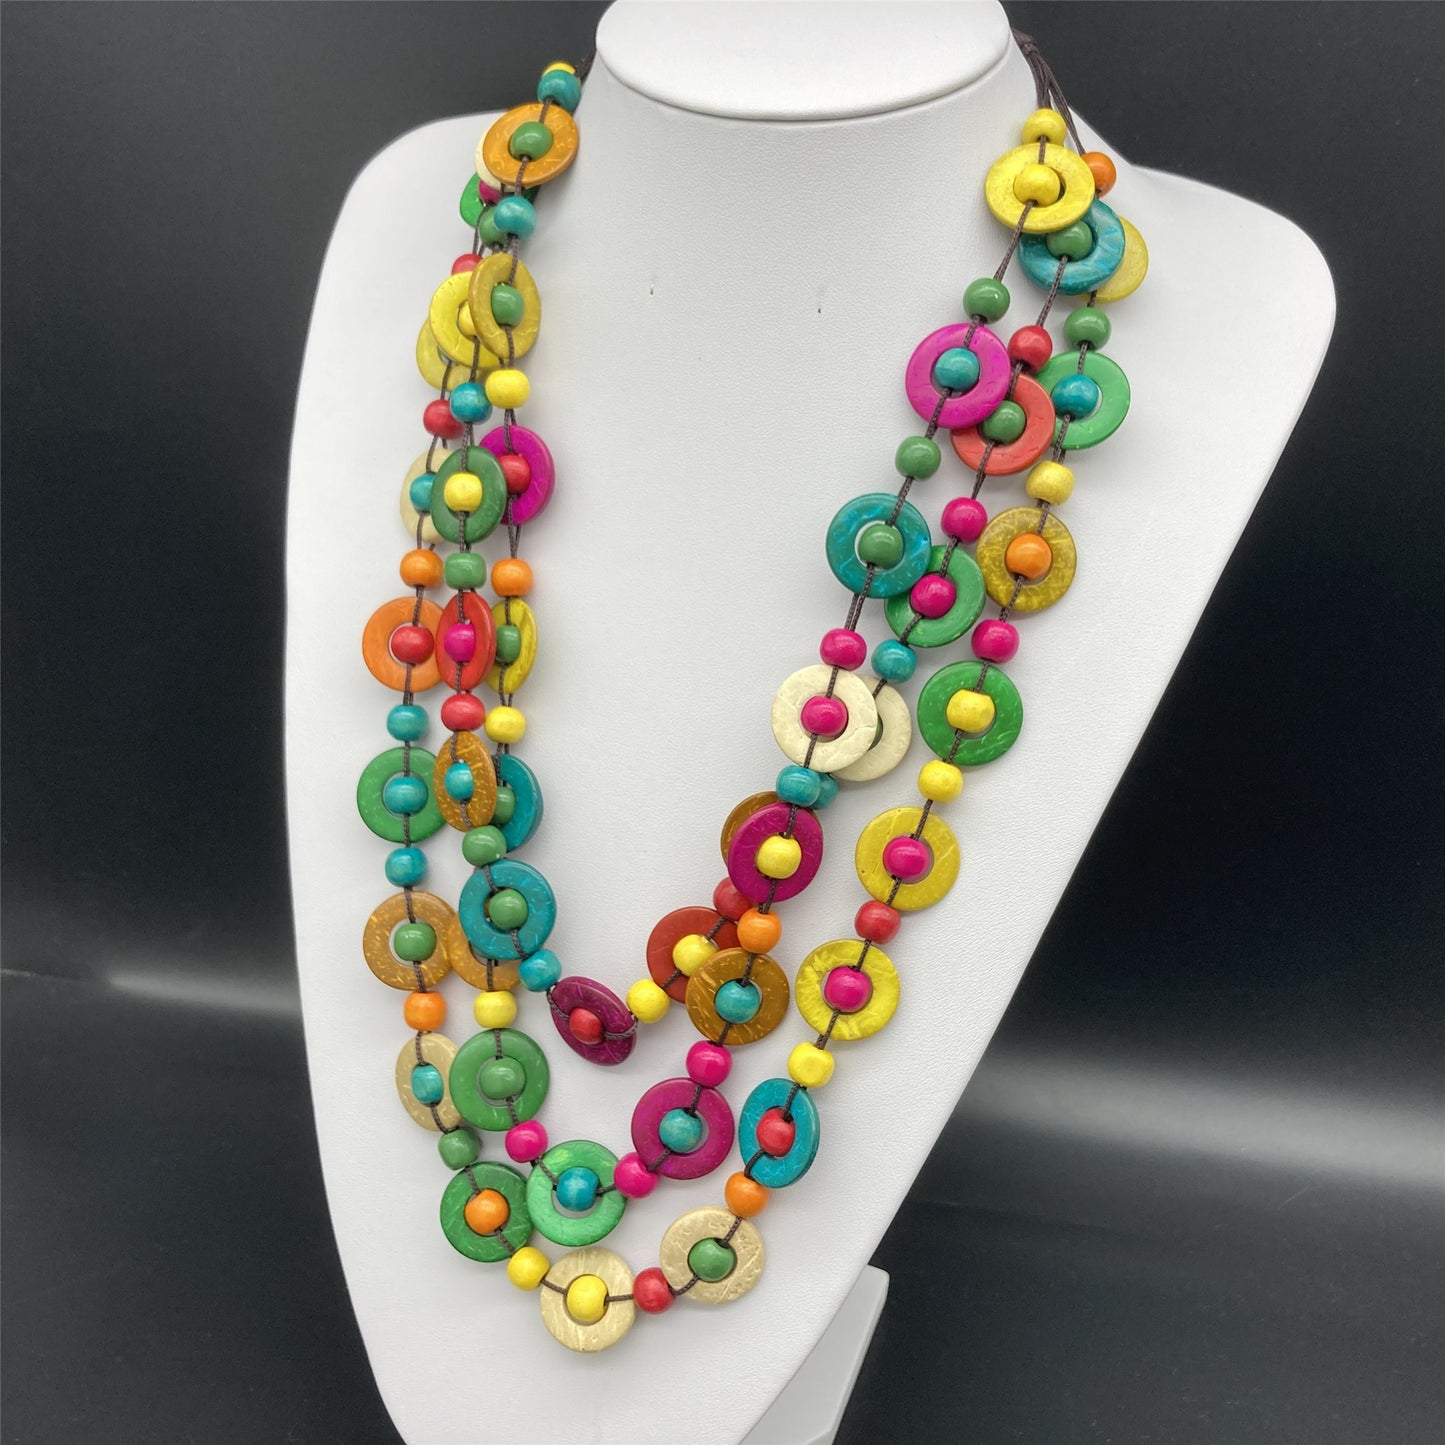 Glamorous Wooden Beaded Bohemian Sweater Chain Necklaces